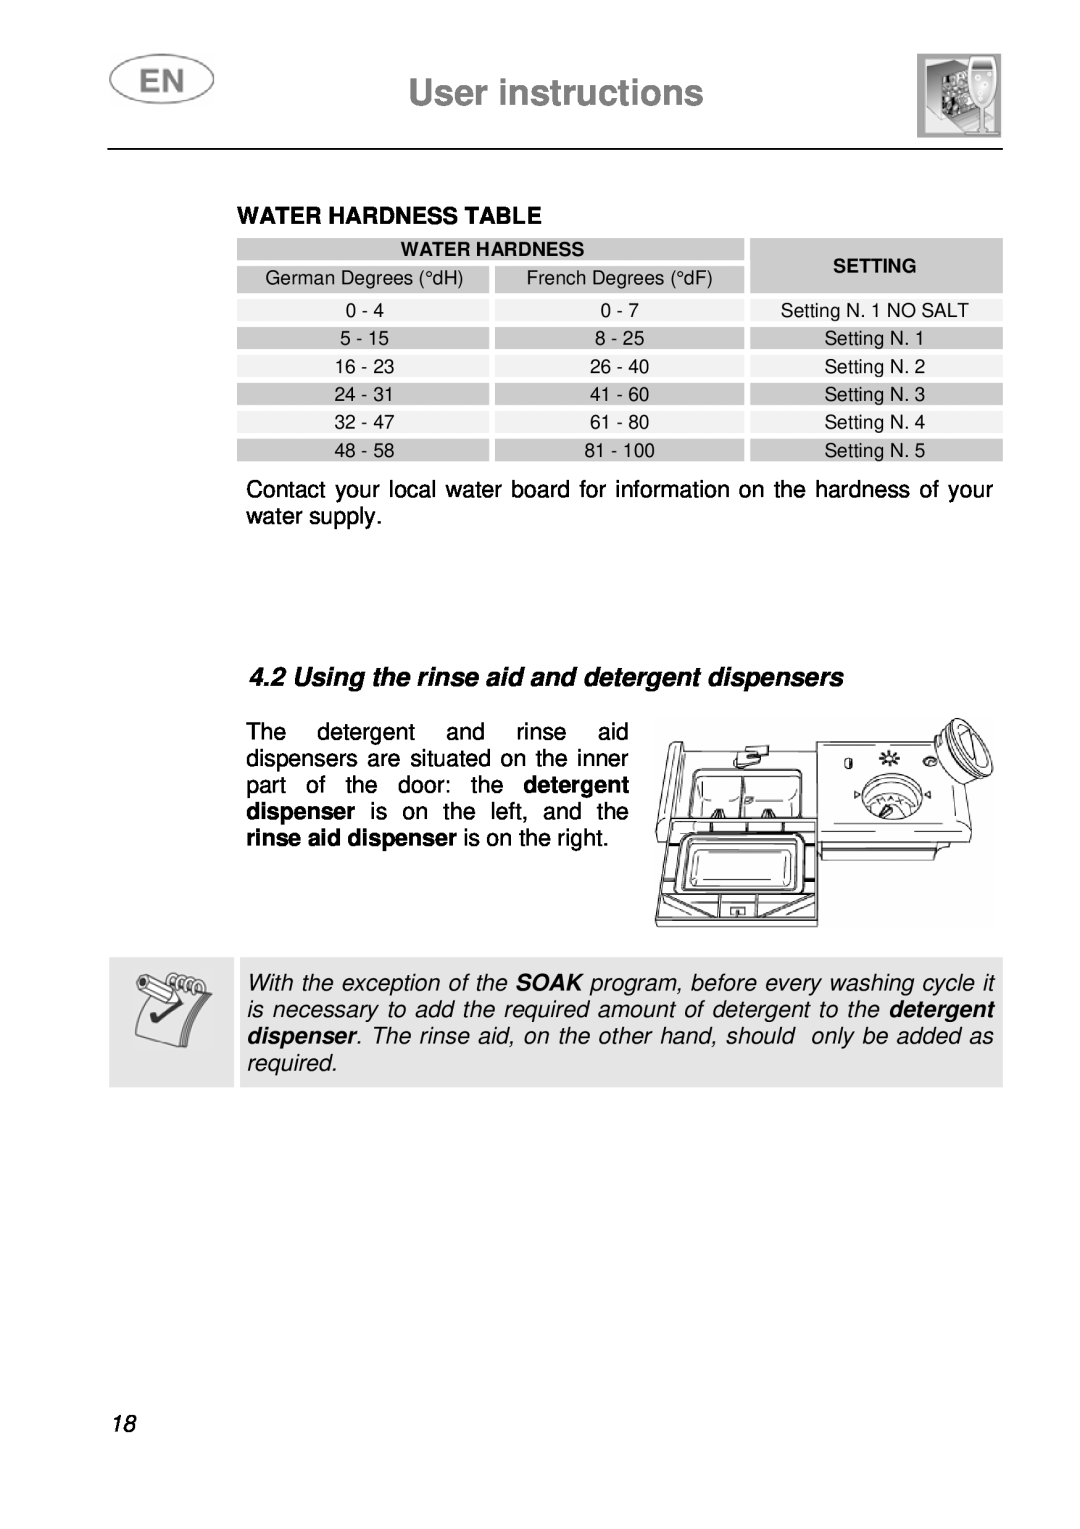 Smeg DI612A1 instruction manual User instructions, Using the rinse aid and detergent dispensers, Water Hardness Table 